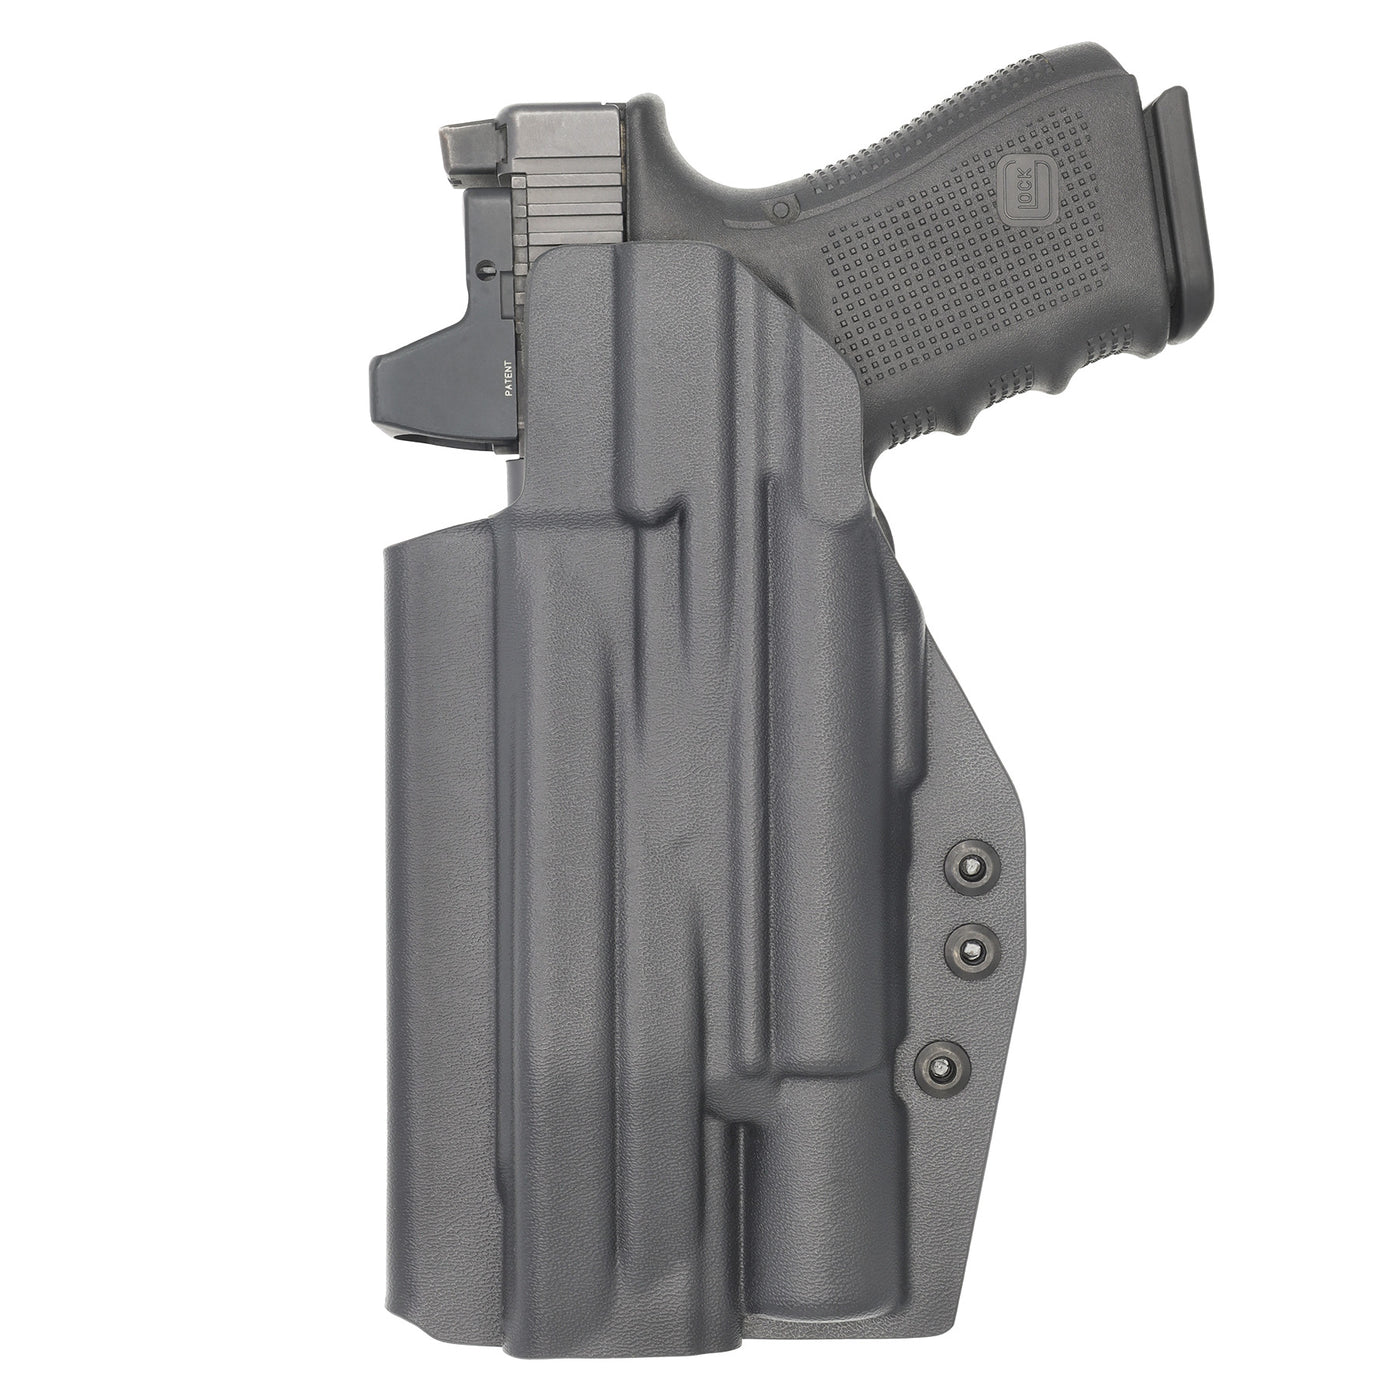 C&G Holsters Quickship IWB Tactical Glock Surefire X300 in holstered position back view